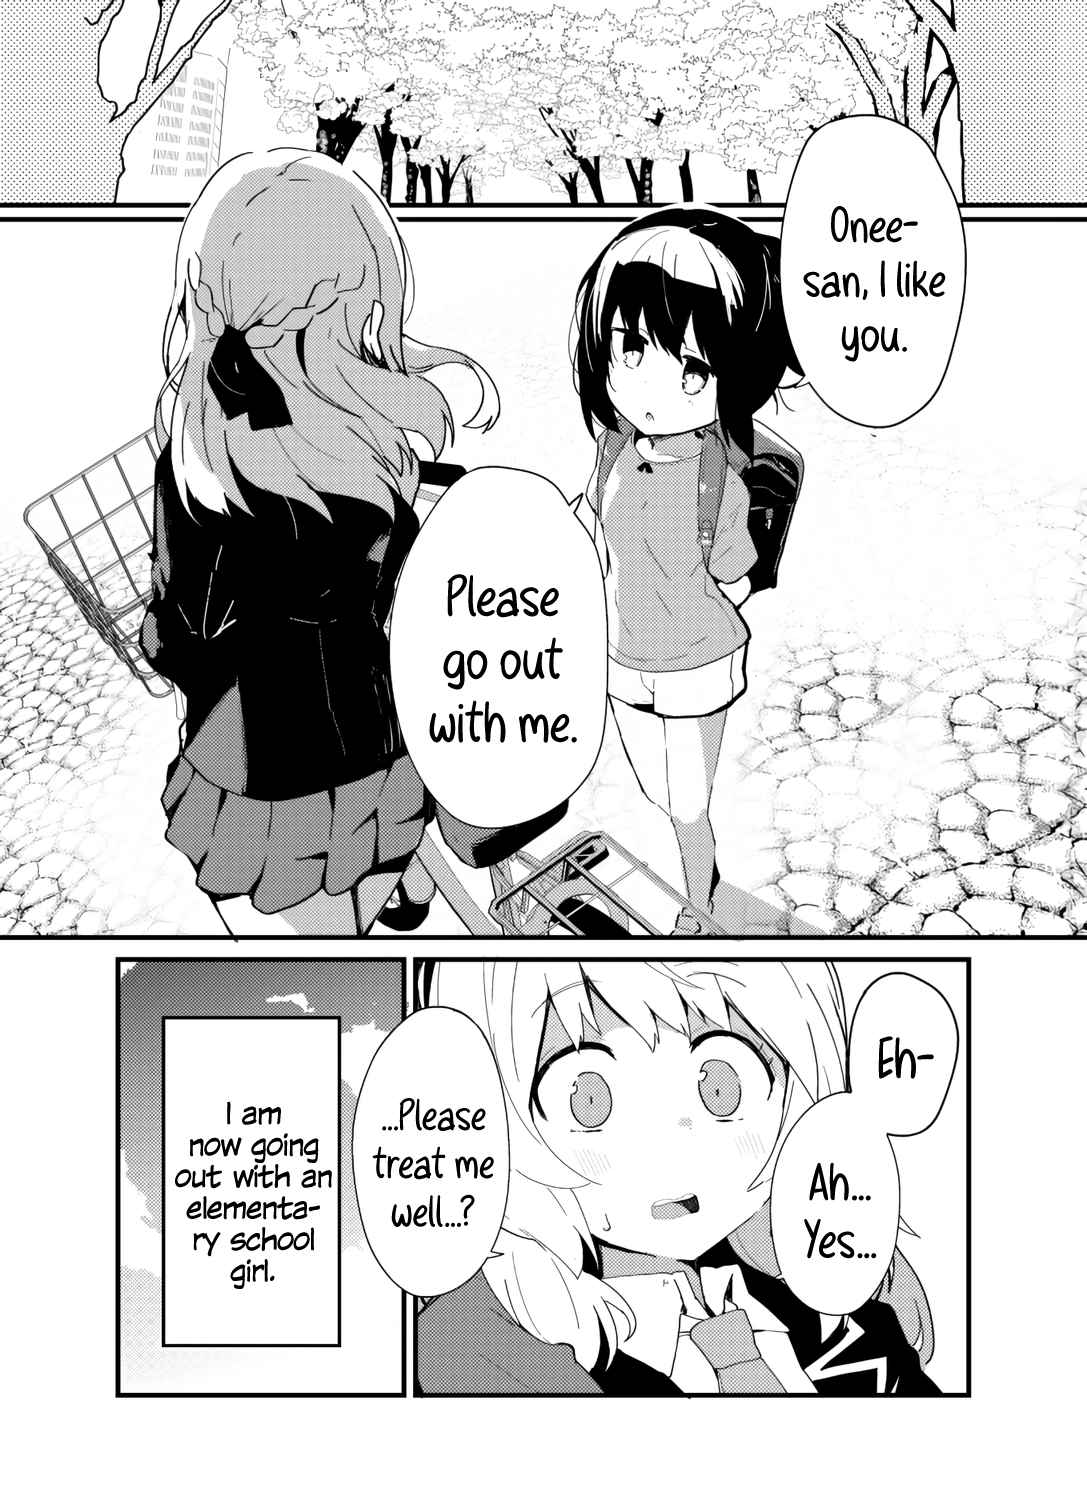 A manga about the start of an onee-loli relationship